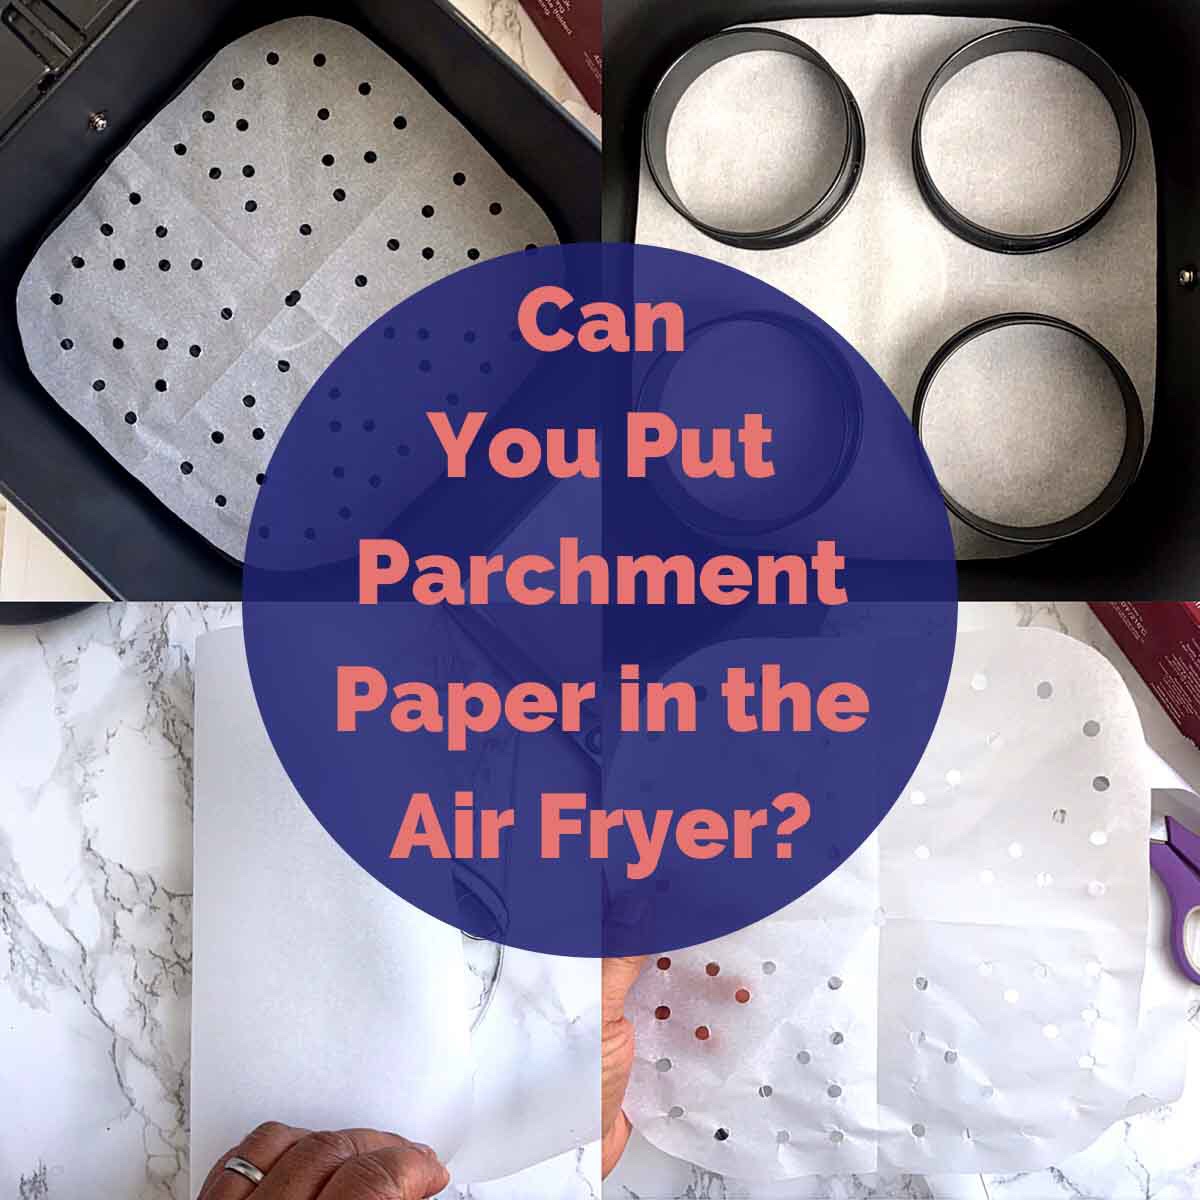 Can you put Parchment paper in an Air fryer